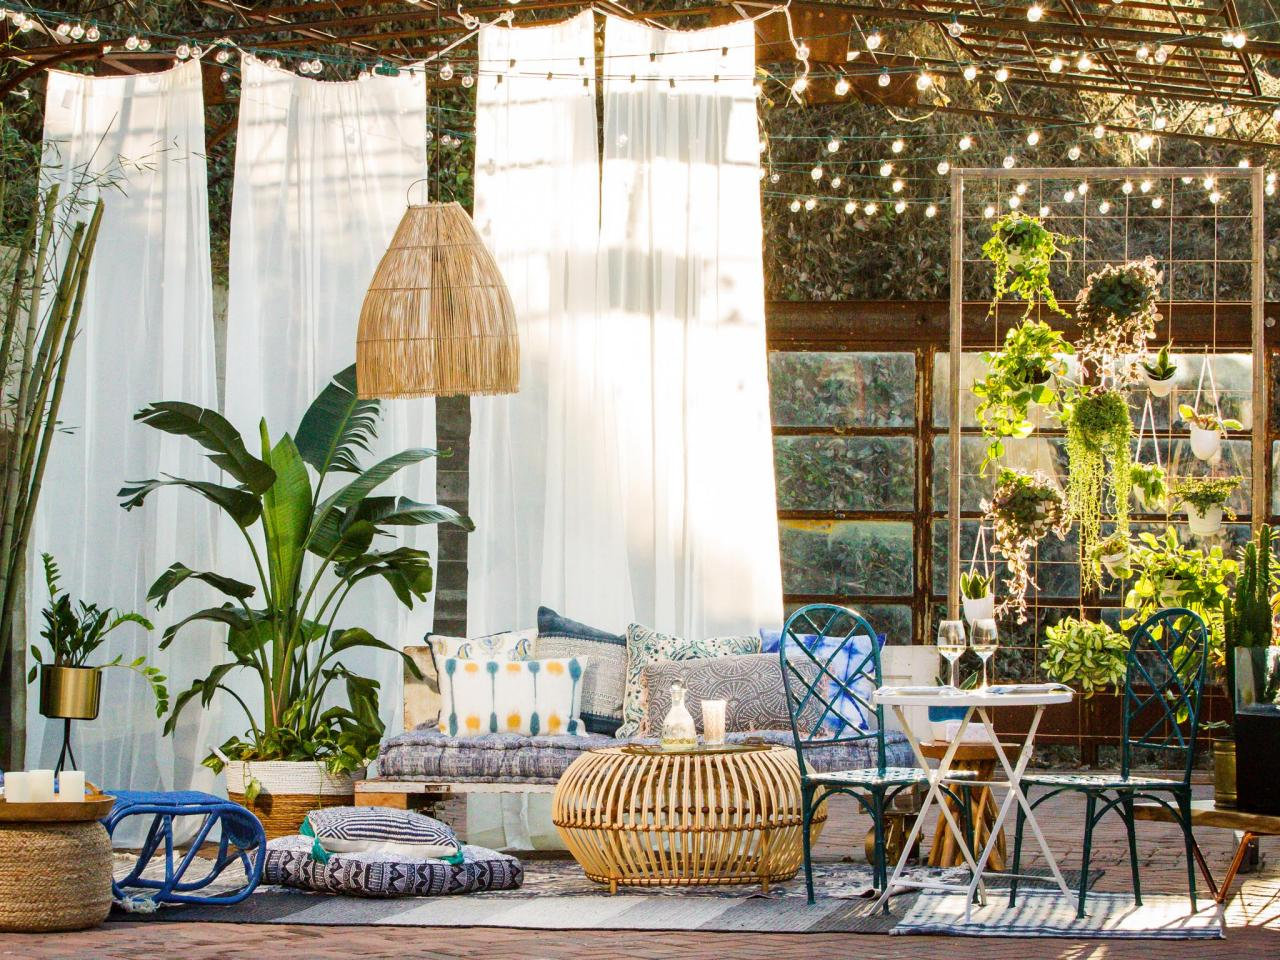 Bohemian themed outdoor space with floor cushions and hanging lights to make it cozy